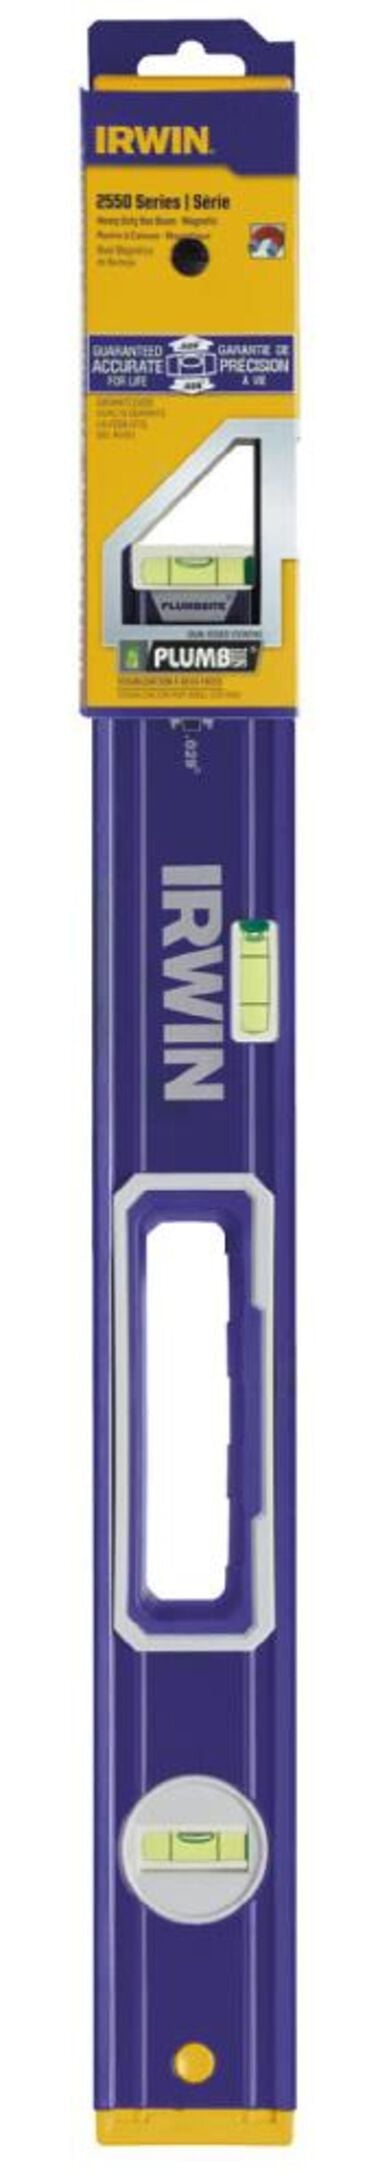 Irwin 24 In. 2550 Magnetic Box Beam Level, large image number 0